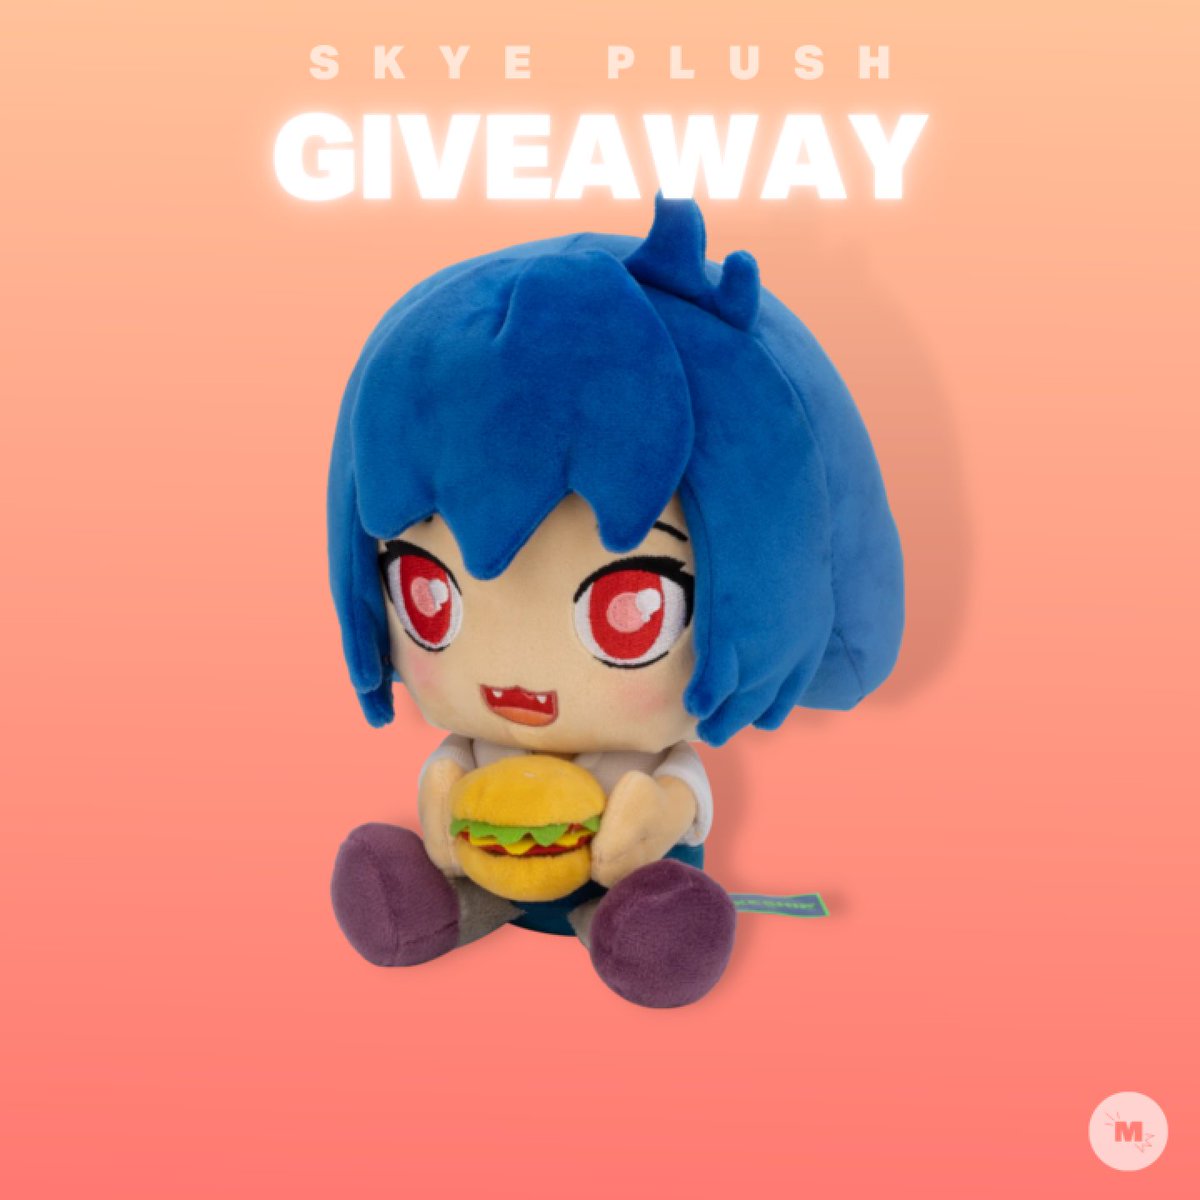 It's giveaway time! We're giving you the chance to win 1 of 2 Skye Plushies 🥳 
How to enter?
1. Follow @makeship & @hcnone
2. RT this post
Contest ends on Nov 1st at 5PM (GMT). Good luck! 